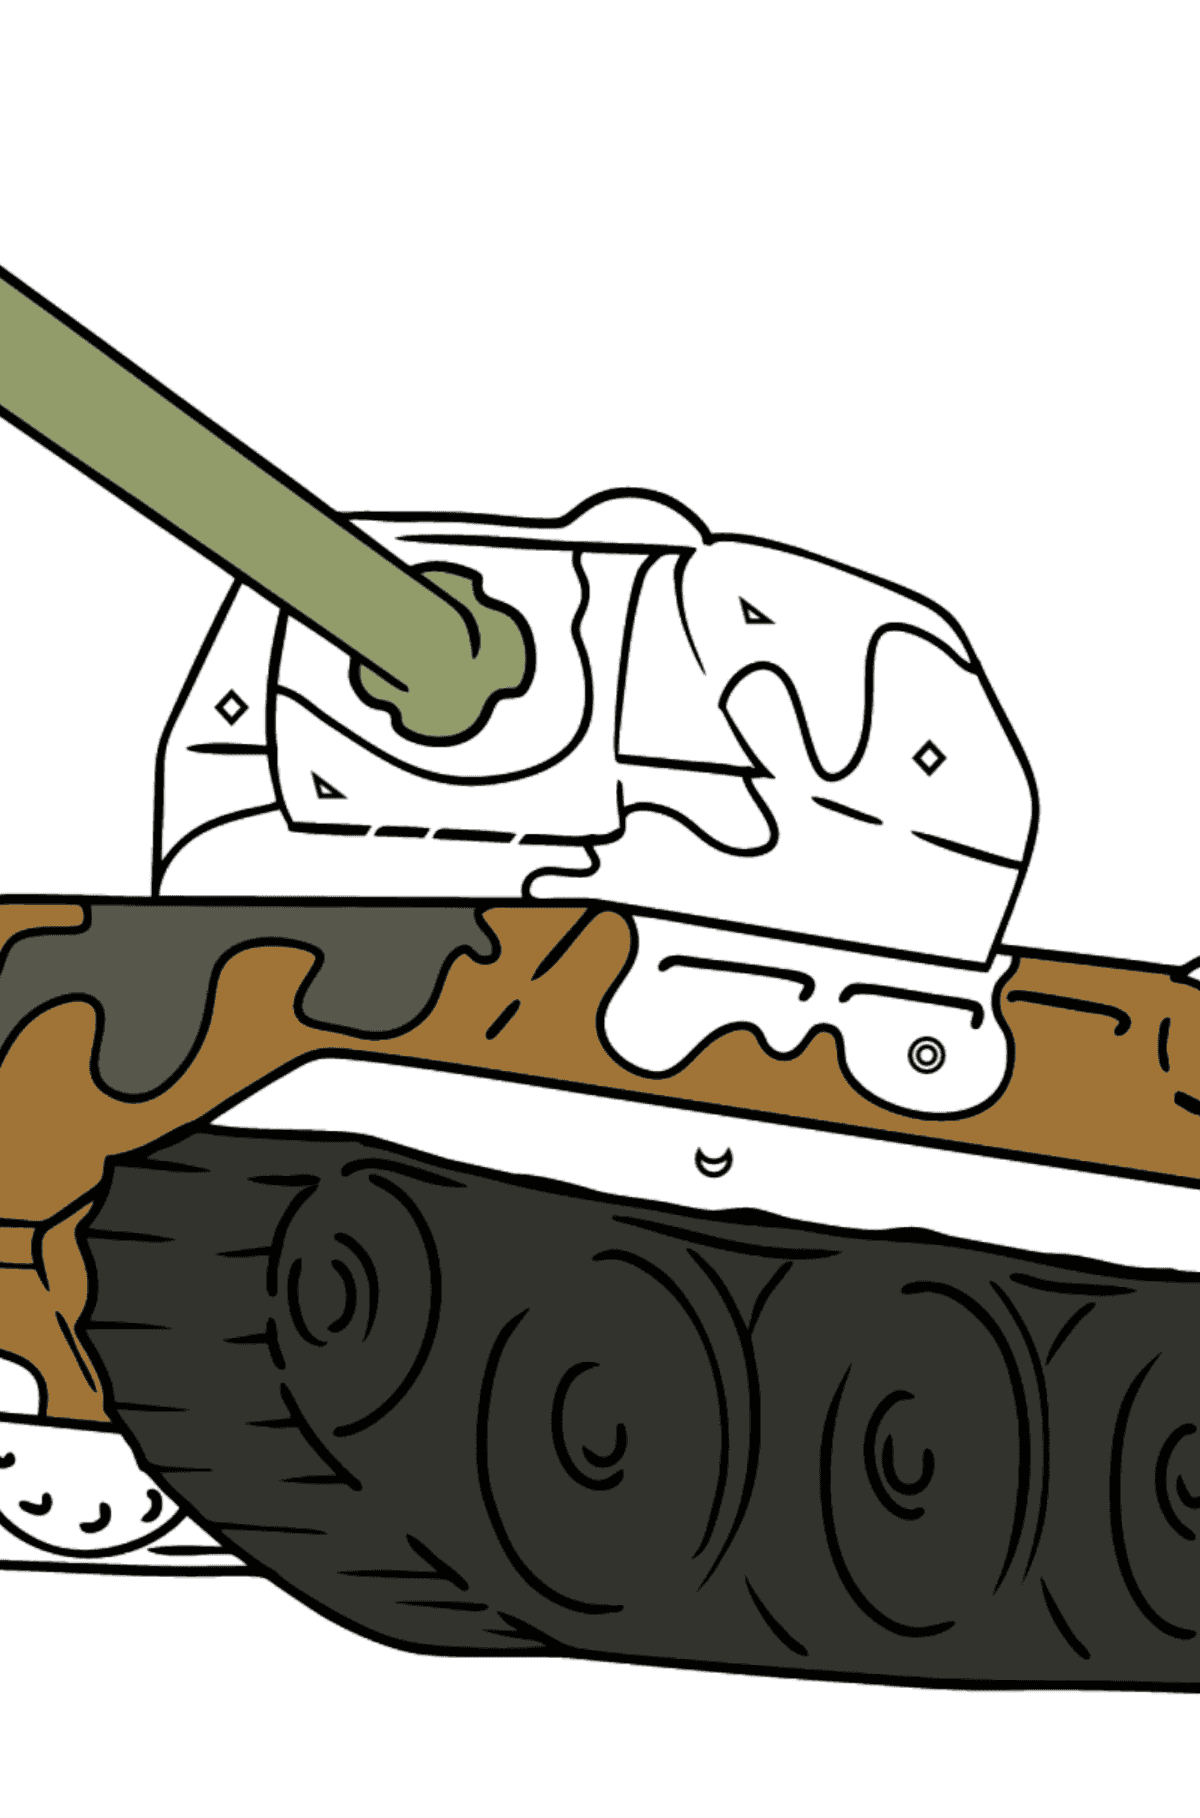 Tank with Anti-Aircraft Gun coloring page - Coloring by Symbols and Geometric Shapes for Kids